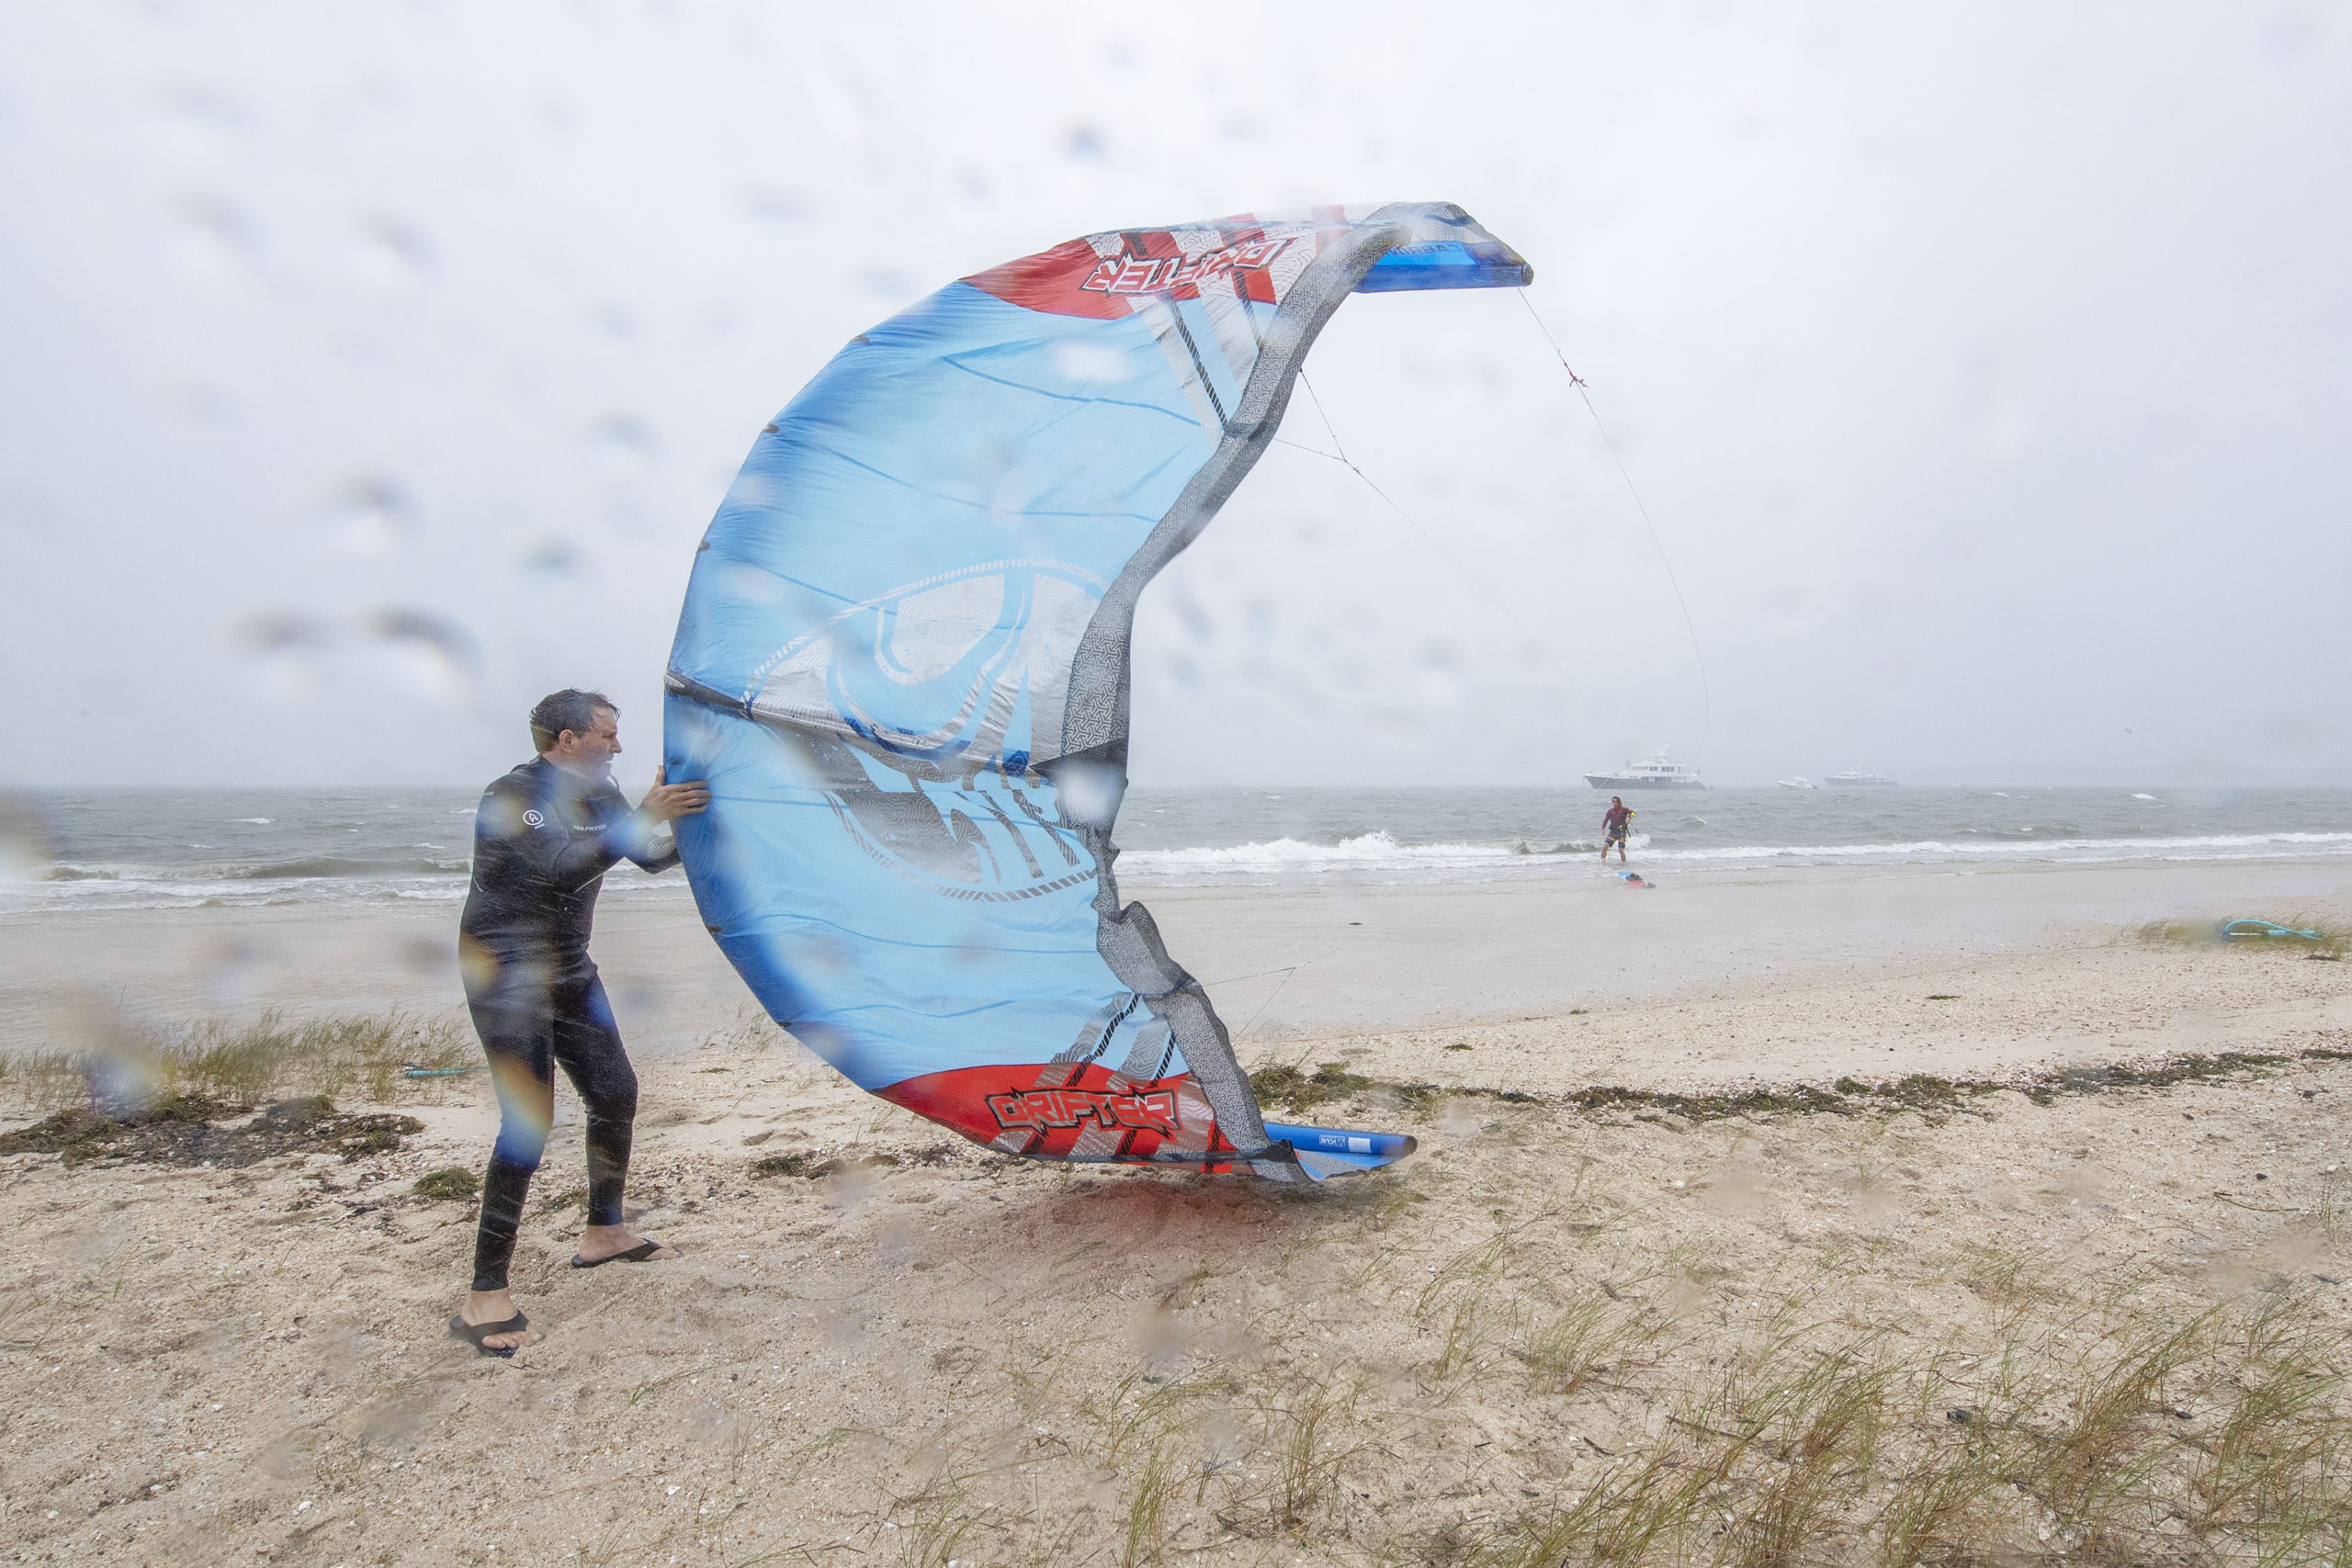 A fellow kiteboarder helps Ben Miller launch his kite in 30-mph wind gusts and rain as he goes kiteboarding along Long Beach in Sag Harbor during Tropical Storm Henri on Sunday.   MICHAEL HELLER